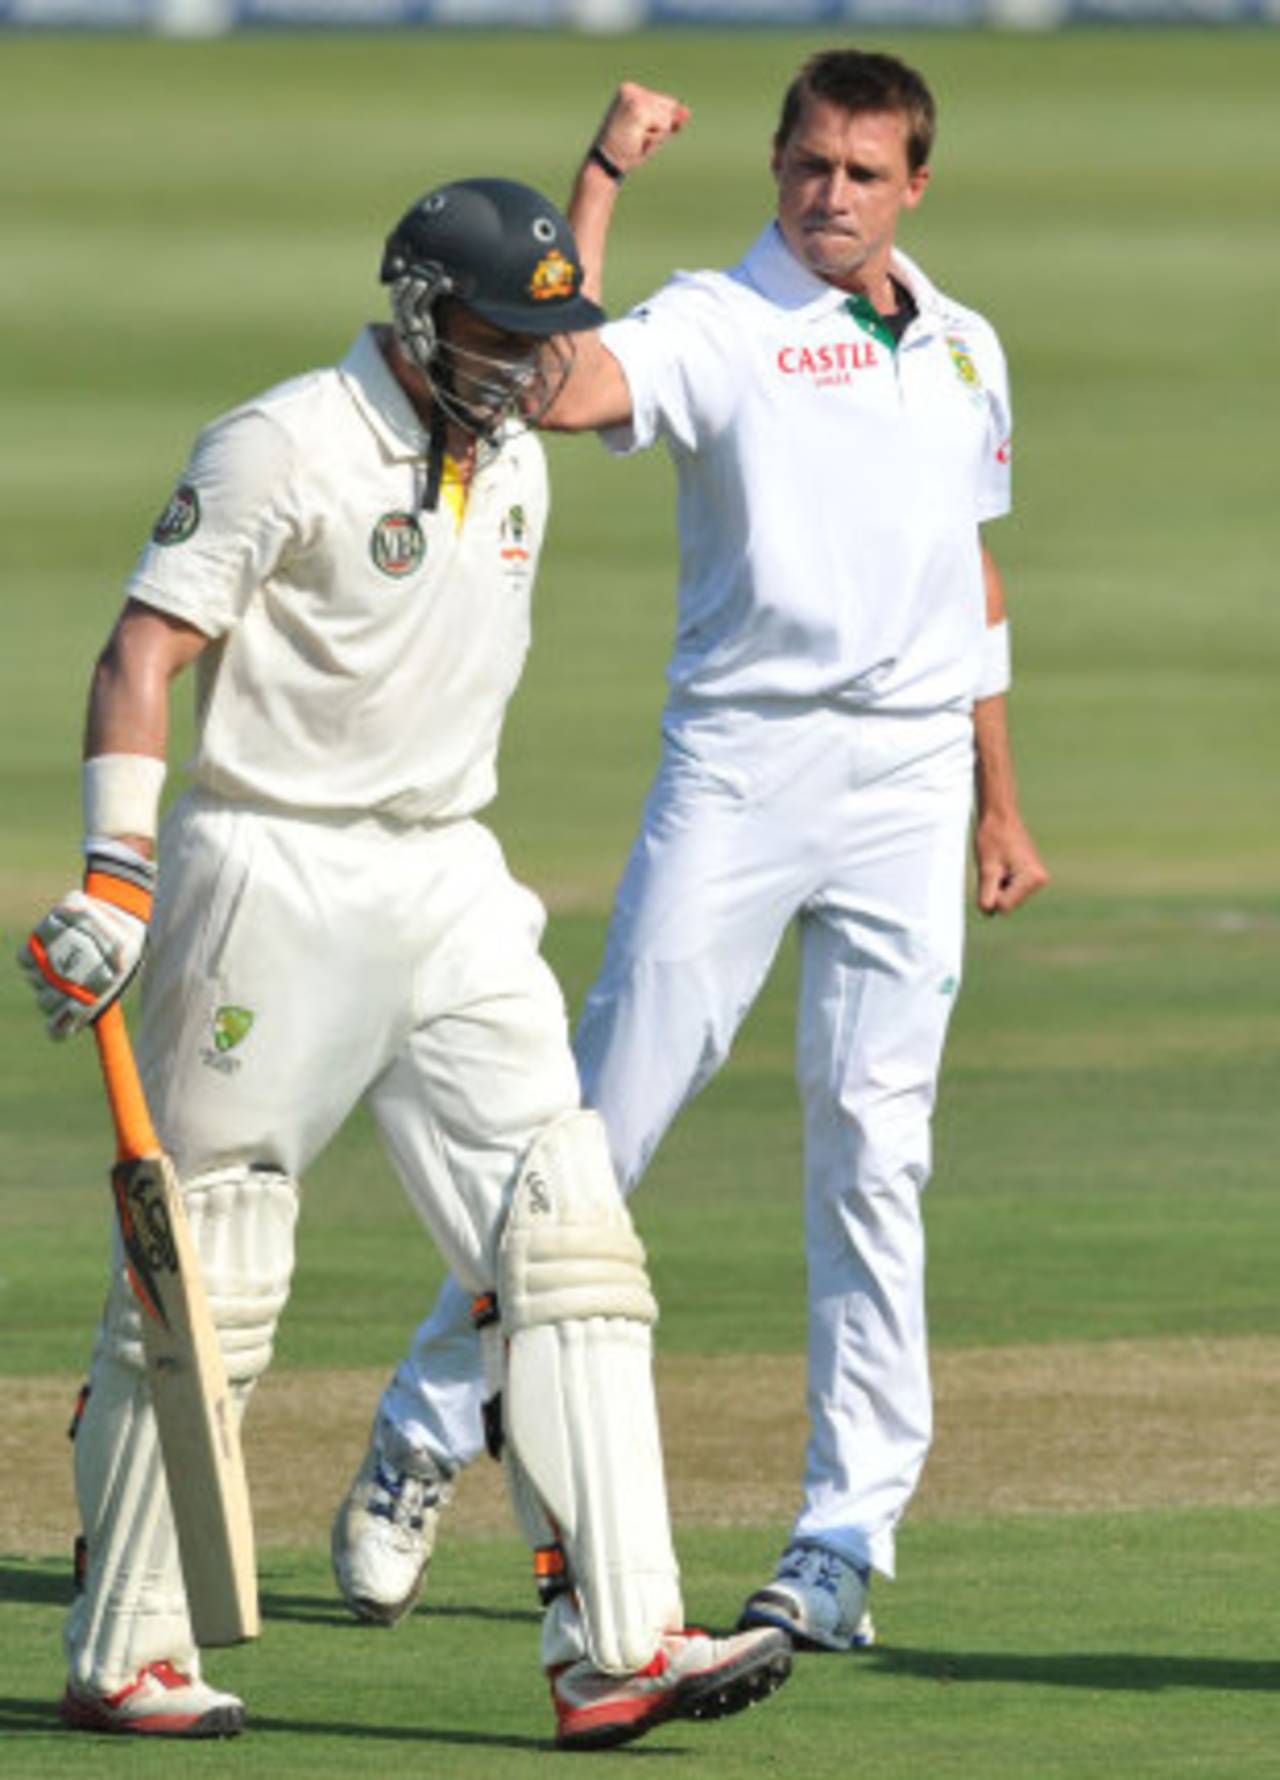 Dale Steyn pumps his fist as Michael Hussey departs, South Africa v Australia, 2nd Test, Johannesburg, 2nd day, November 18, 2011